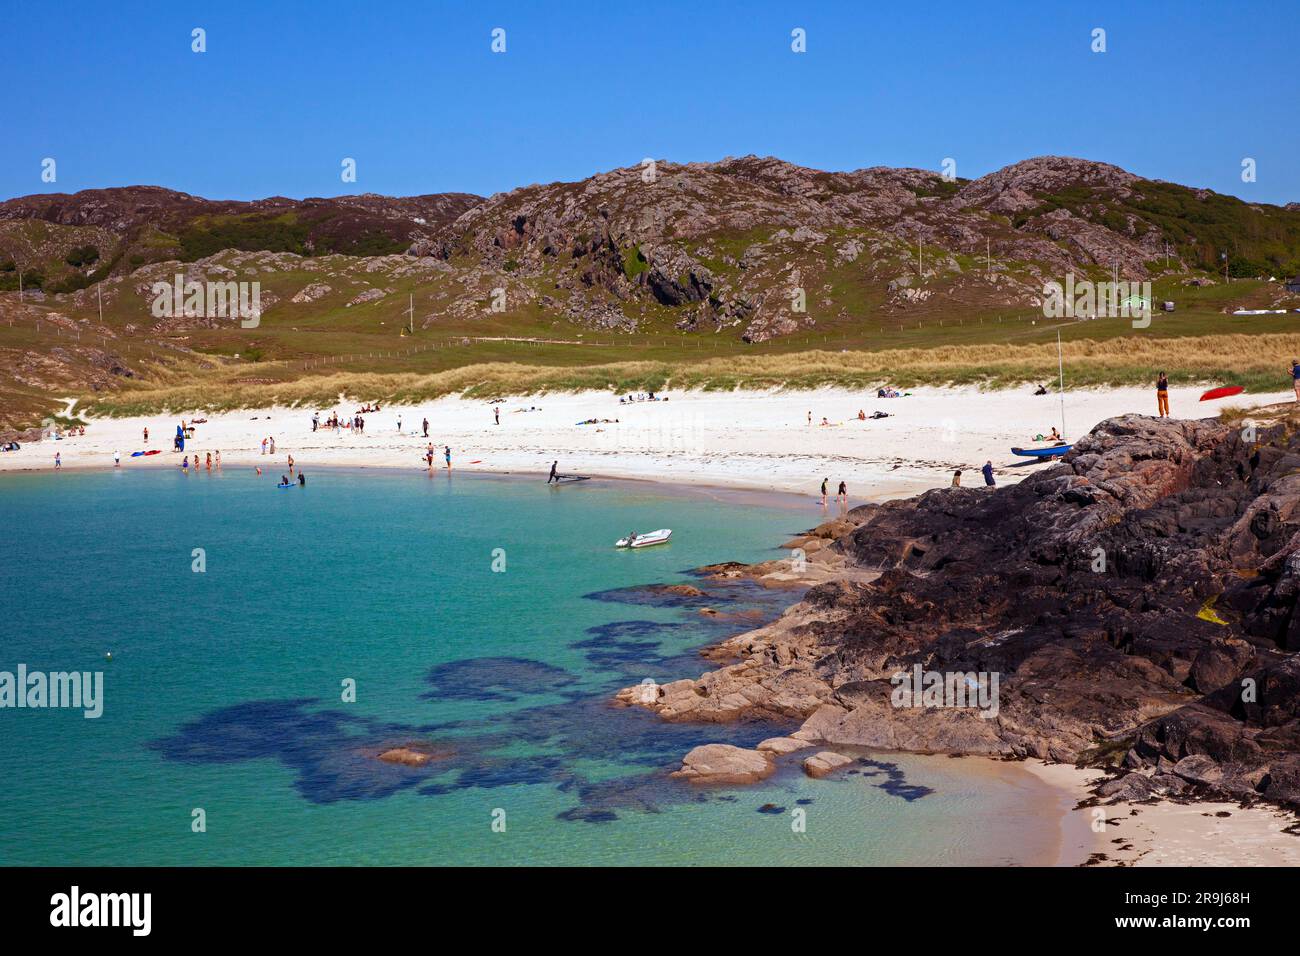 Beach at Achmelvich in Assynt, Sutherland, North West Scotland, Achmelvich Bay, Beach, Scotland, UK Stock Photo